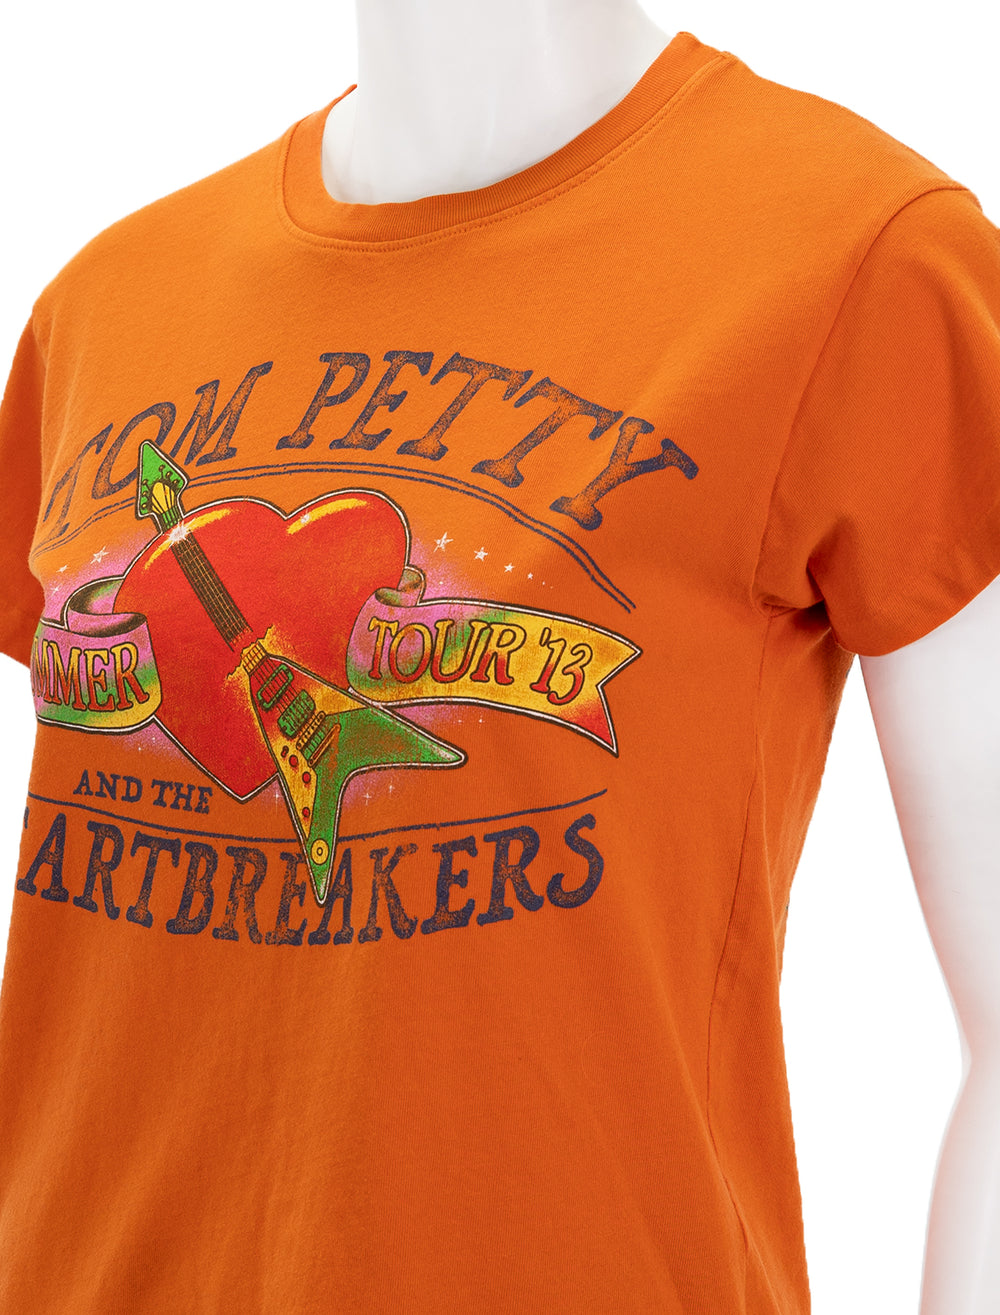 Close-up view of Daydreamer's tom petty t-shirt in tangerine.